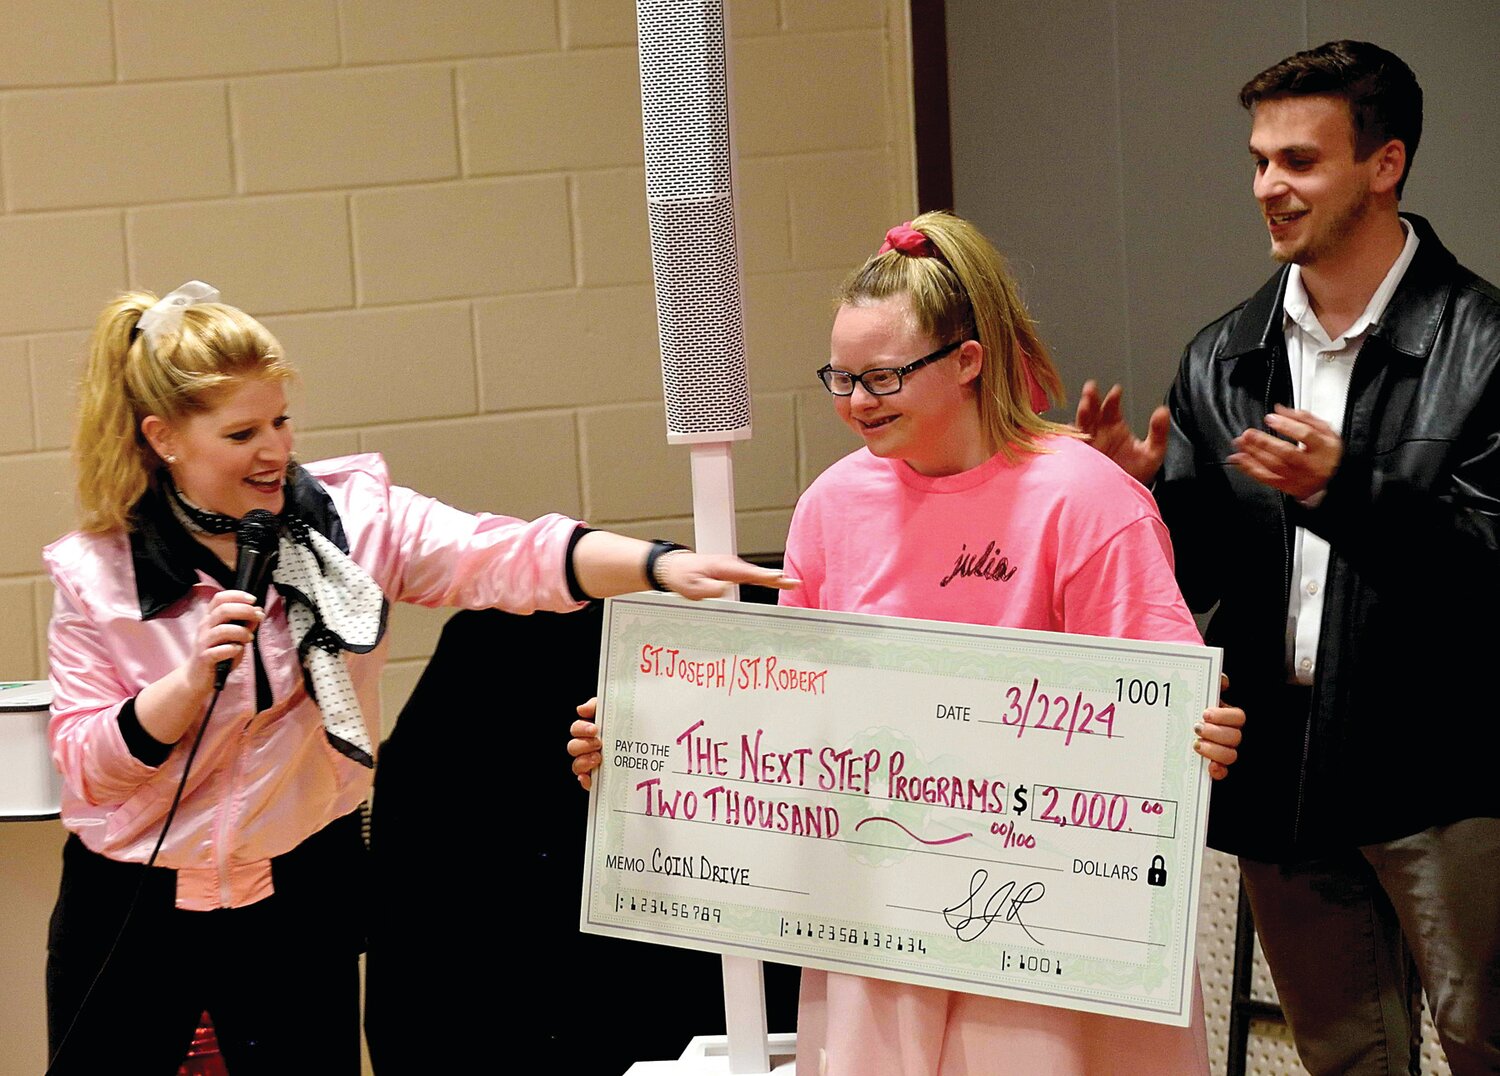 St. Joseph/St. Robert Home and School Association President Nikki DeGuida presents the check to The Next Step's Julia Shirey, while Josh Fields, The Next Step executive director, applauds.